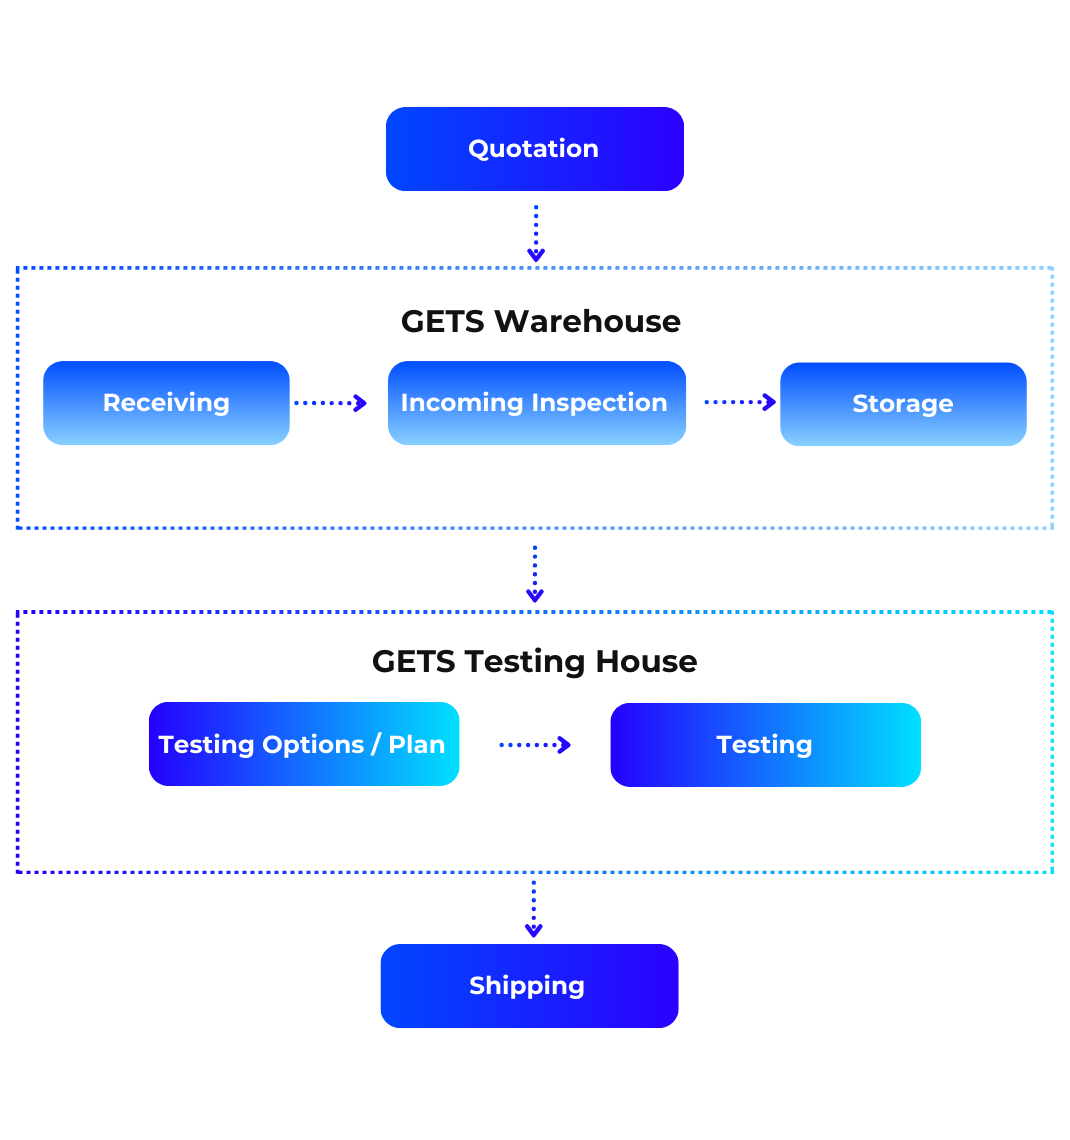 Flowchart showing the process of component warehousing with Global ETS. This starts with a Quotation, and once approved, parts go to the GETS Warehouse for Receiving, Incoming Inspection, and Storage. It continues to a GETS Testing House for Testing, and finally ends with Shipping. 